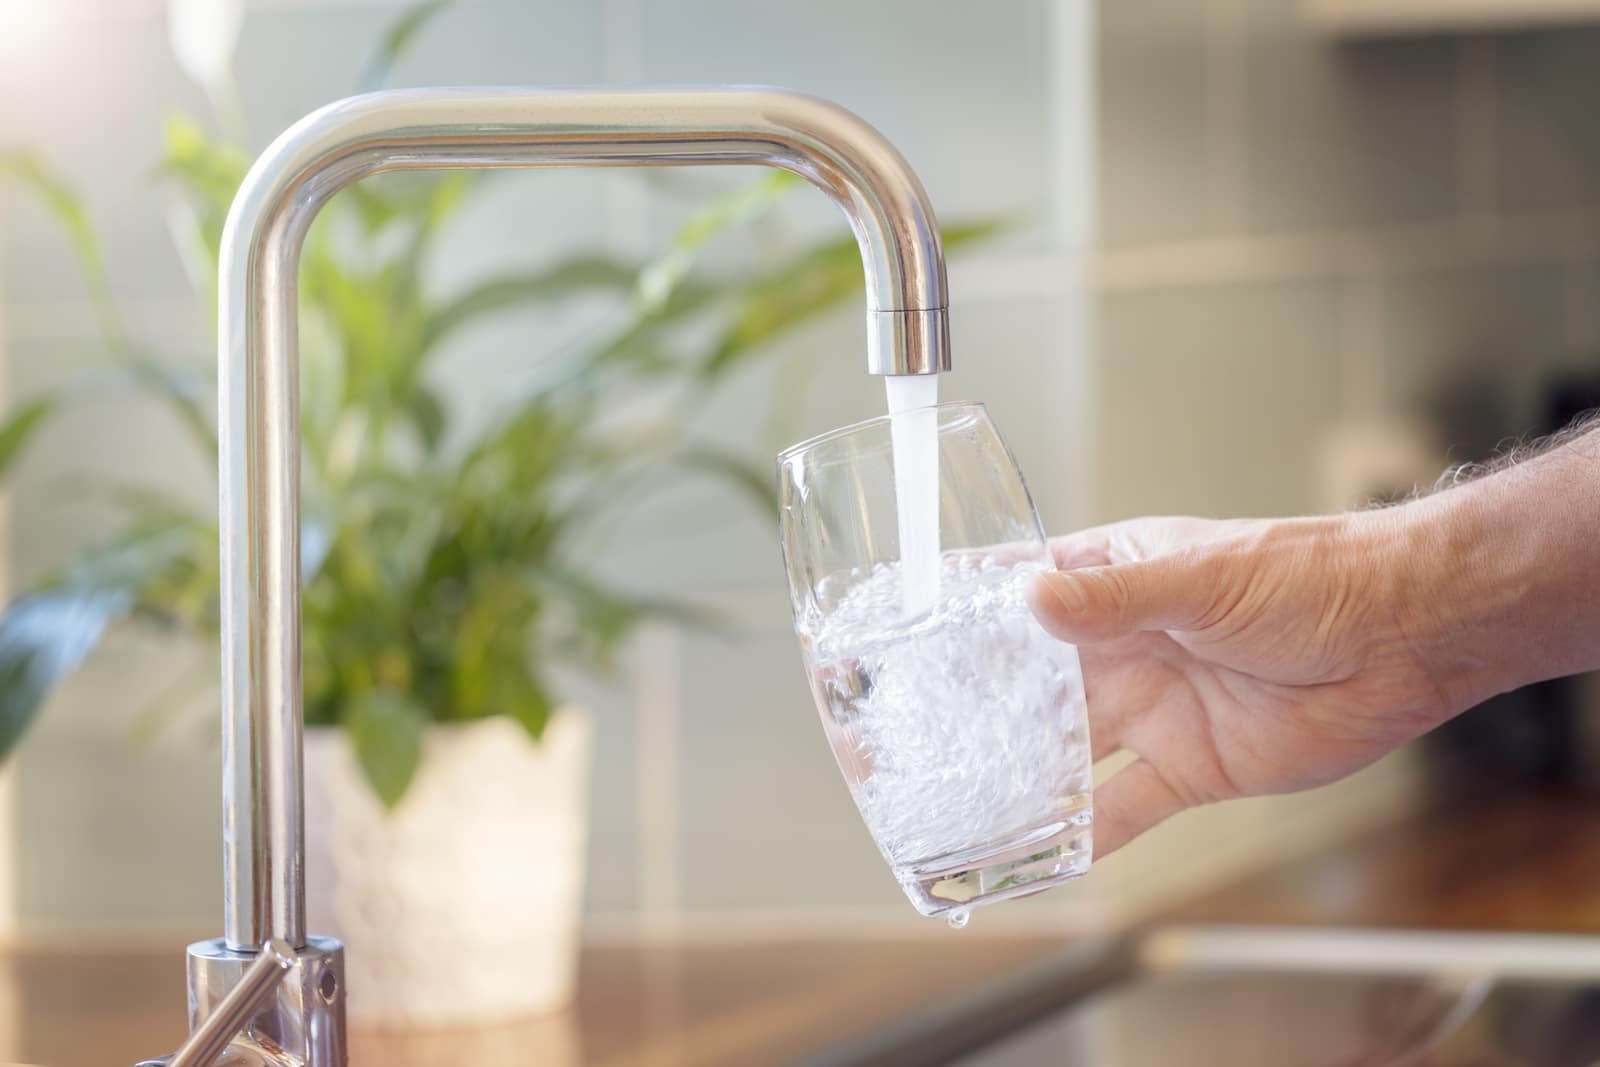 Where to buy drinking water filtration systems for your home - under the sink tap water filtration